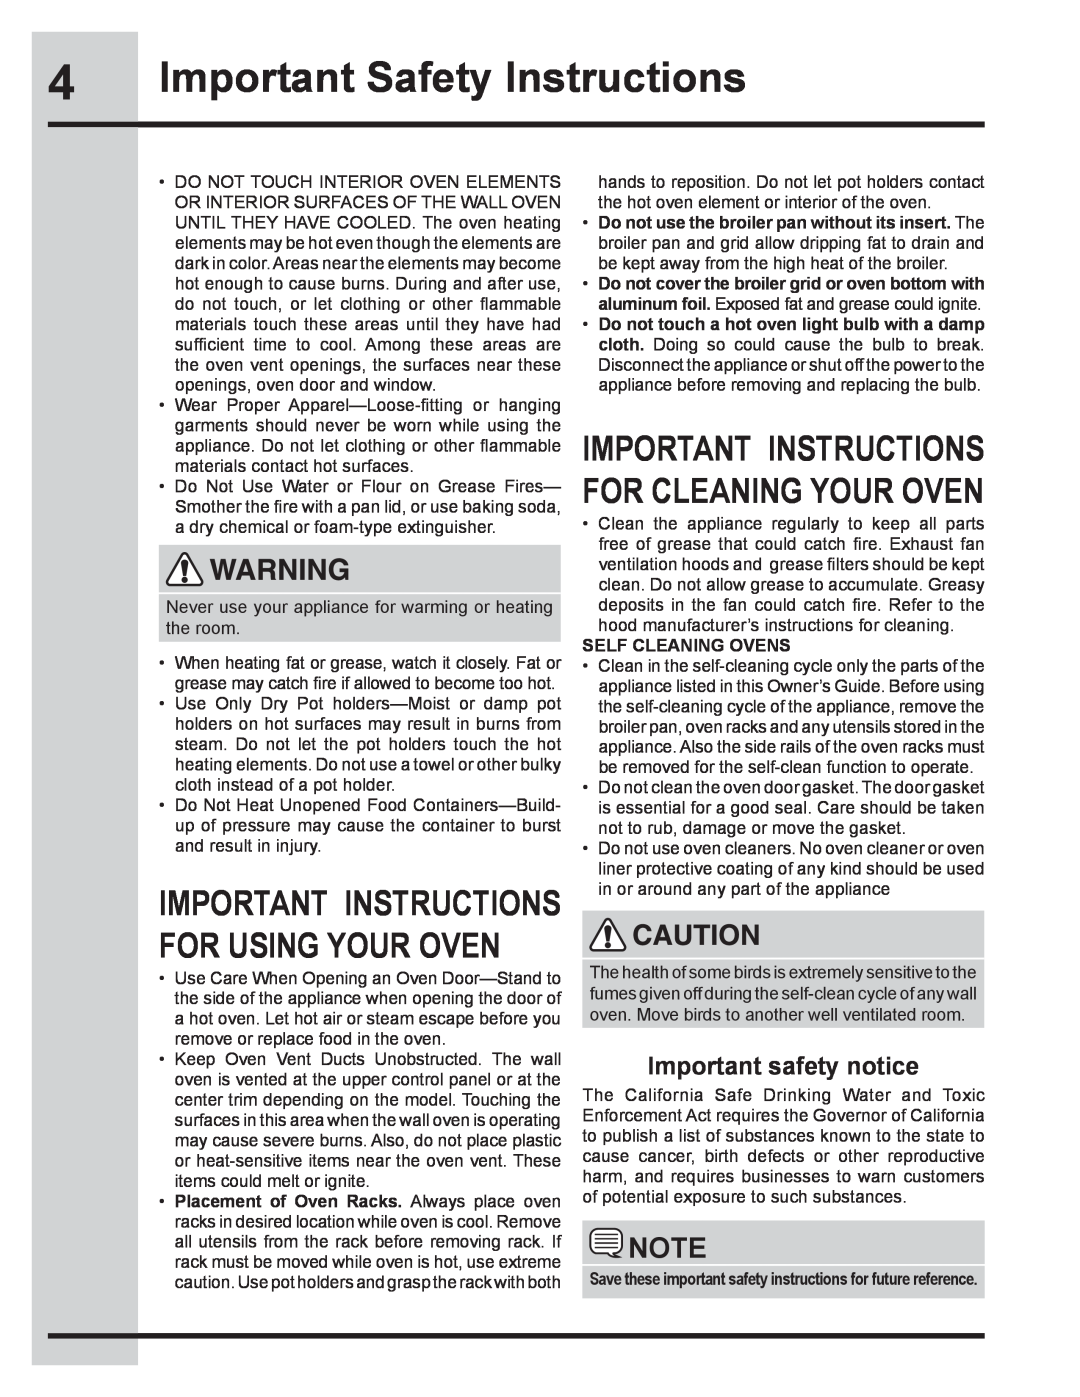 Electrolux 318205134 Important Safety Instructions, Important safety notice, Important Instructions For Using Your Oven 